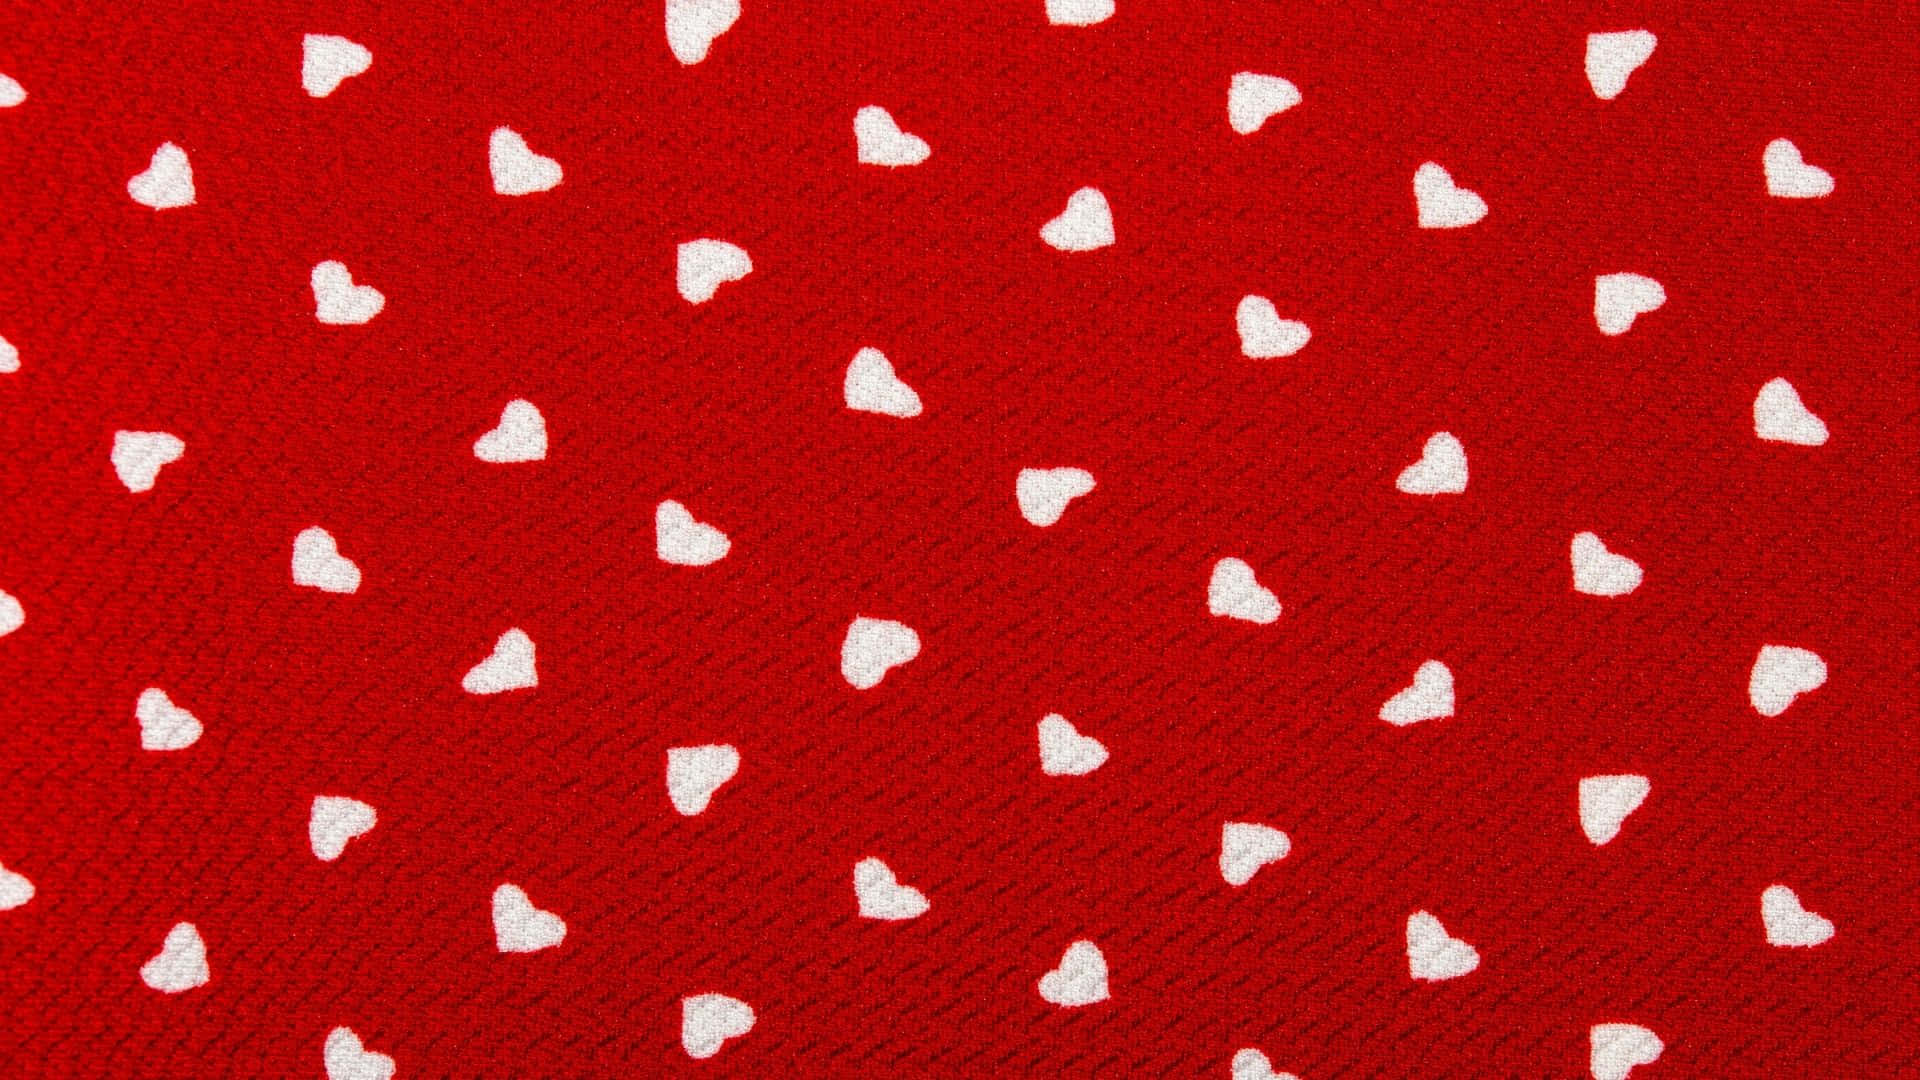 red fabric with white hearts on it